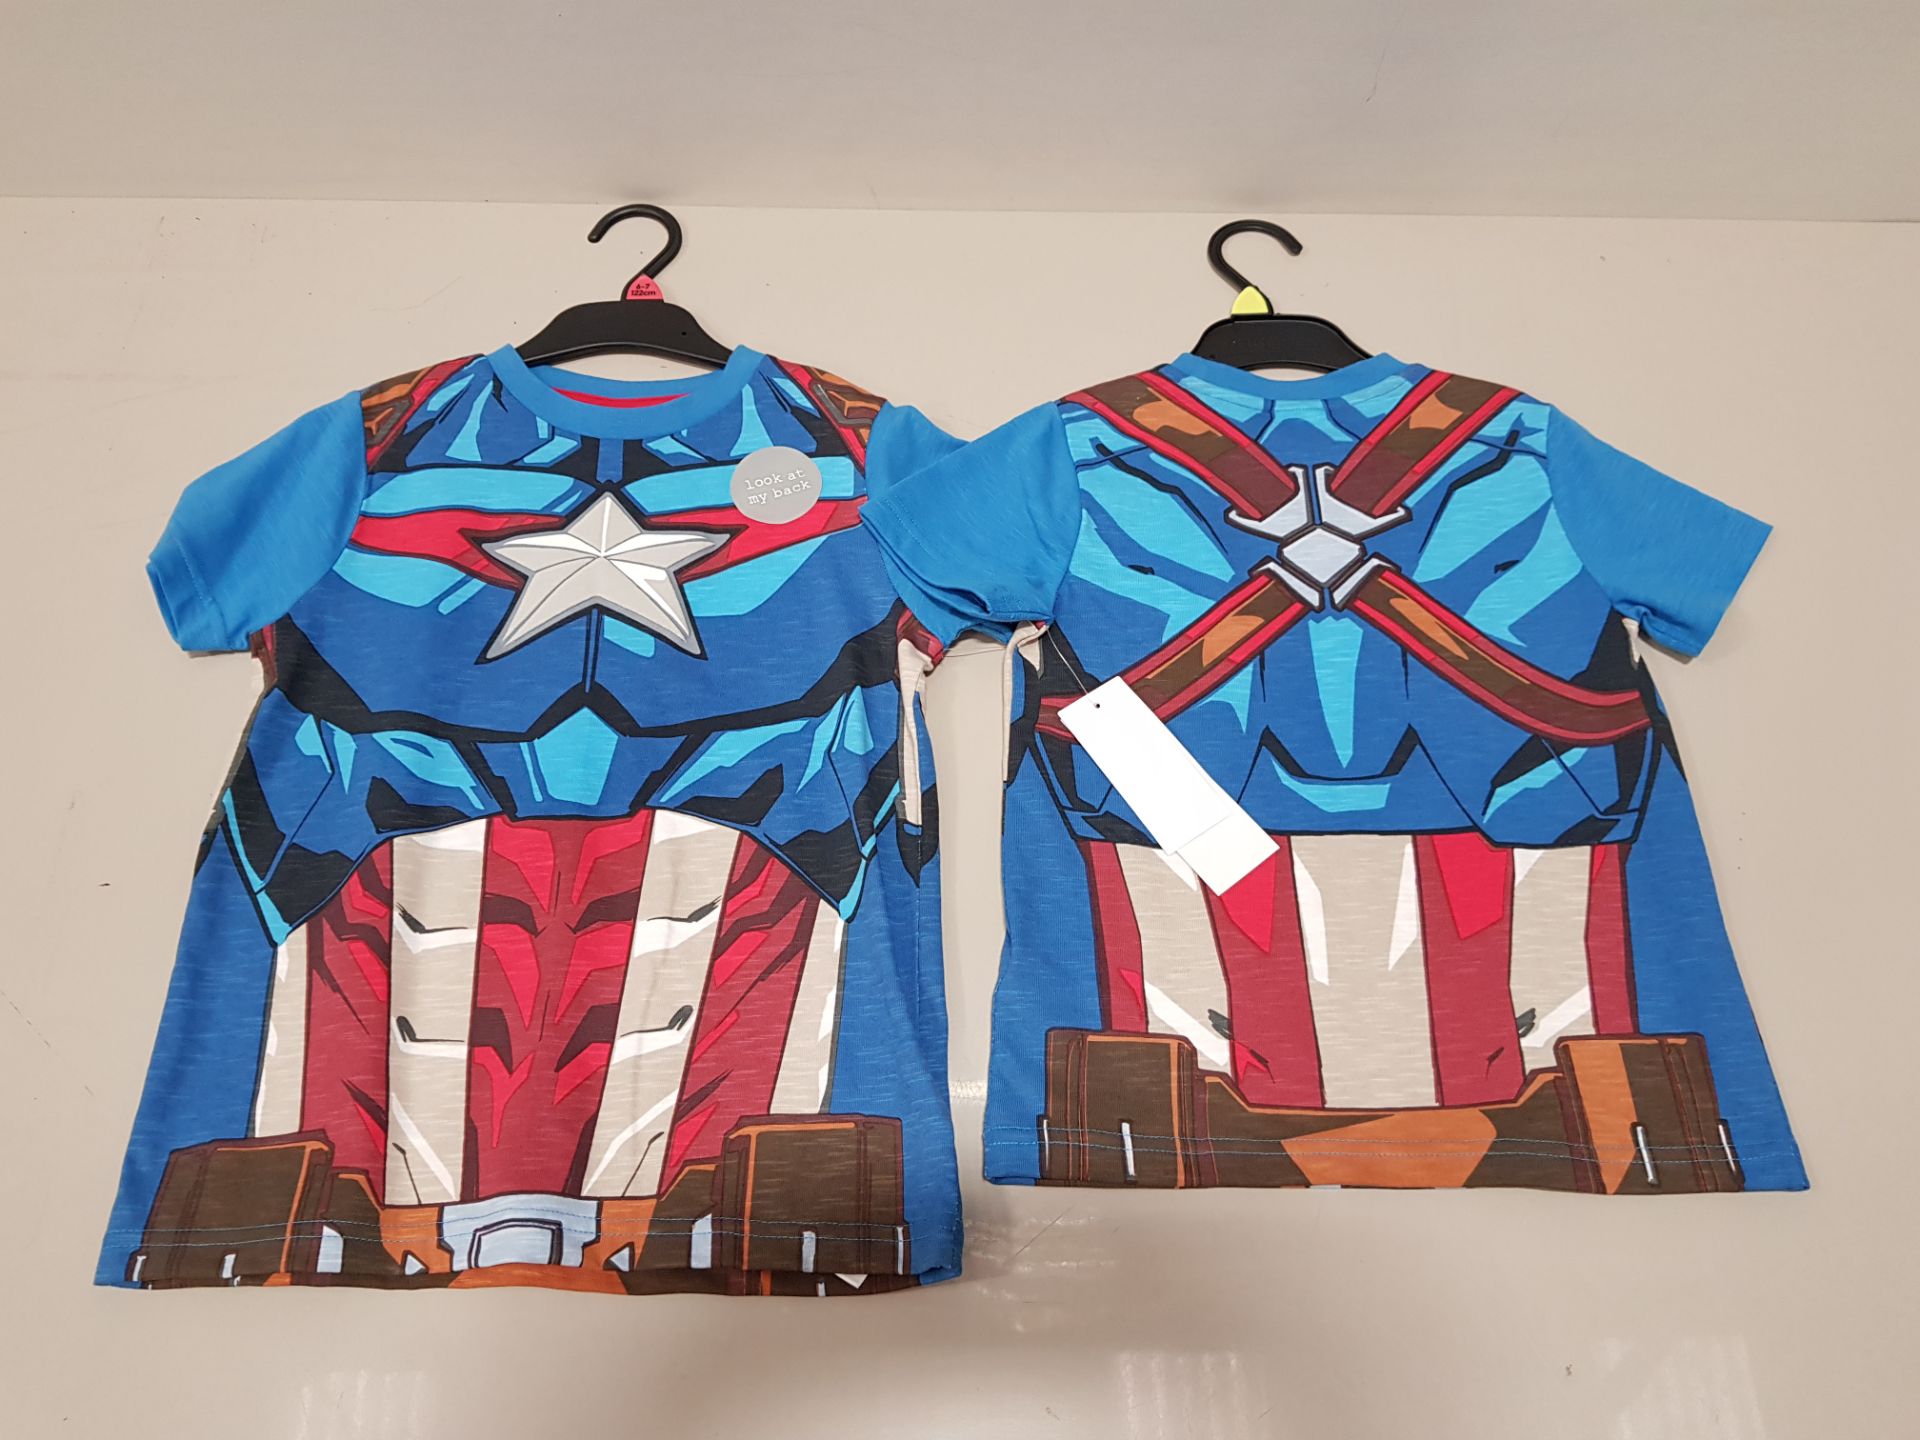 APPROX 50 X BRAND NEW MARVEL AVENGERS BOYS T-SHIRTS IN DIFFERENT SIZES